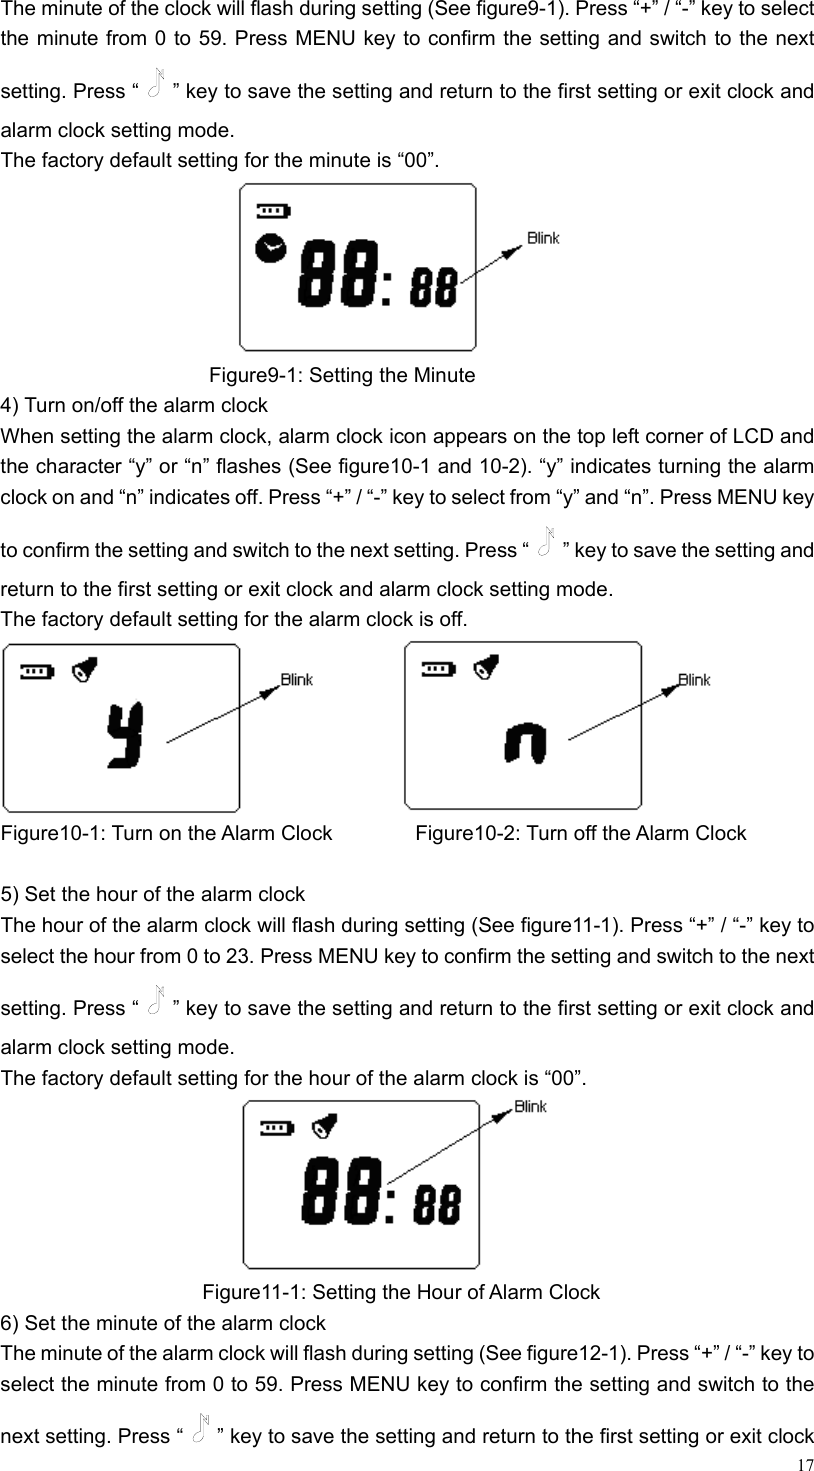  17The minute of the clock will flash during setting (See figure9-1). Press “+” / “-” key to select the minute from 0 to 59. Press MENU key to confirm the setting and switch to the next setting. Press “ ” key to save the setting and return to the first setting or exit clock and alarm clock setting mode. The factory default setting for the minute is “00”.                           Figure9-1: Setting the Minute 4) Turn on/off the alarm clock When setting the alarm clock, alarm clock icon appears on the top left corner of LCD and the character “y” or “n” flashes (See figure10-1 and 10-2). “y” indicates turning the alarm clock on and “n” indicates off. Press “+” / “-” key to select from “y” and “n”. Press MENU key to confirm the setting and switch to the next setting. Press “ ” key to save the setting and return to the first setting or exit clock and alarm clock setting mode. The factory default setting for the alarm clock is off.           Figure10-1: Turn on the Alarm Clock         Figure10-2: Turn off the Alarm Clock  5) Set the hour of the alarm clock   The hour of the alarm clock will flash during setting (See figure11-1). Press “+” / “-” key to select the hour from 0 to 23. Press MENU key to confirm the setting and switch to the next setting. Press “ ” key to save the setting and return to the first setting or exit clock and alarm clock setting mode. The factory default setting for the hour of the alarm clock is “00”.                        Figure11-1: Setting the Hour of Alarm Clock 6) Set the minute of the alarm clock The minute of the alarm clock will flash during setting (See figure12-1). Press “+” / “-” key to select the minute from 0 to 59. Press MENU key to confirm the setting and switch to the next setting. Press “ ” key to save the setting and return to the first setting or exit clock 